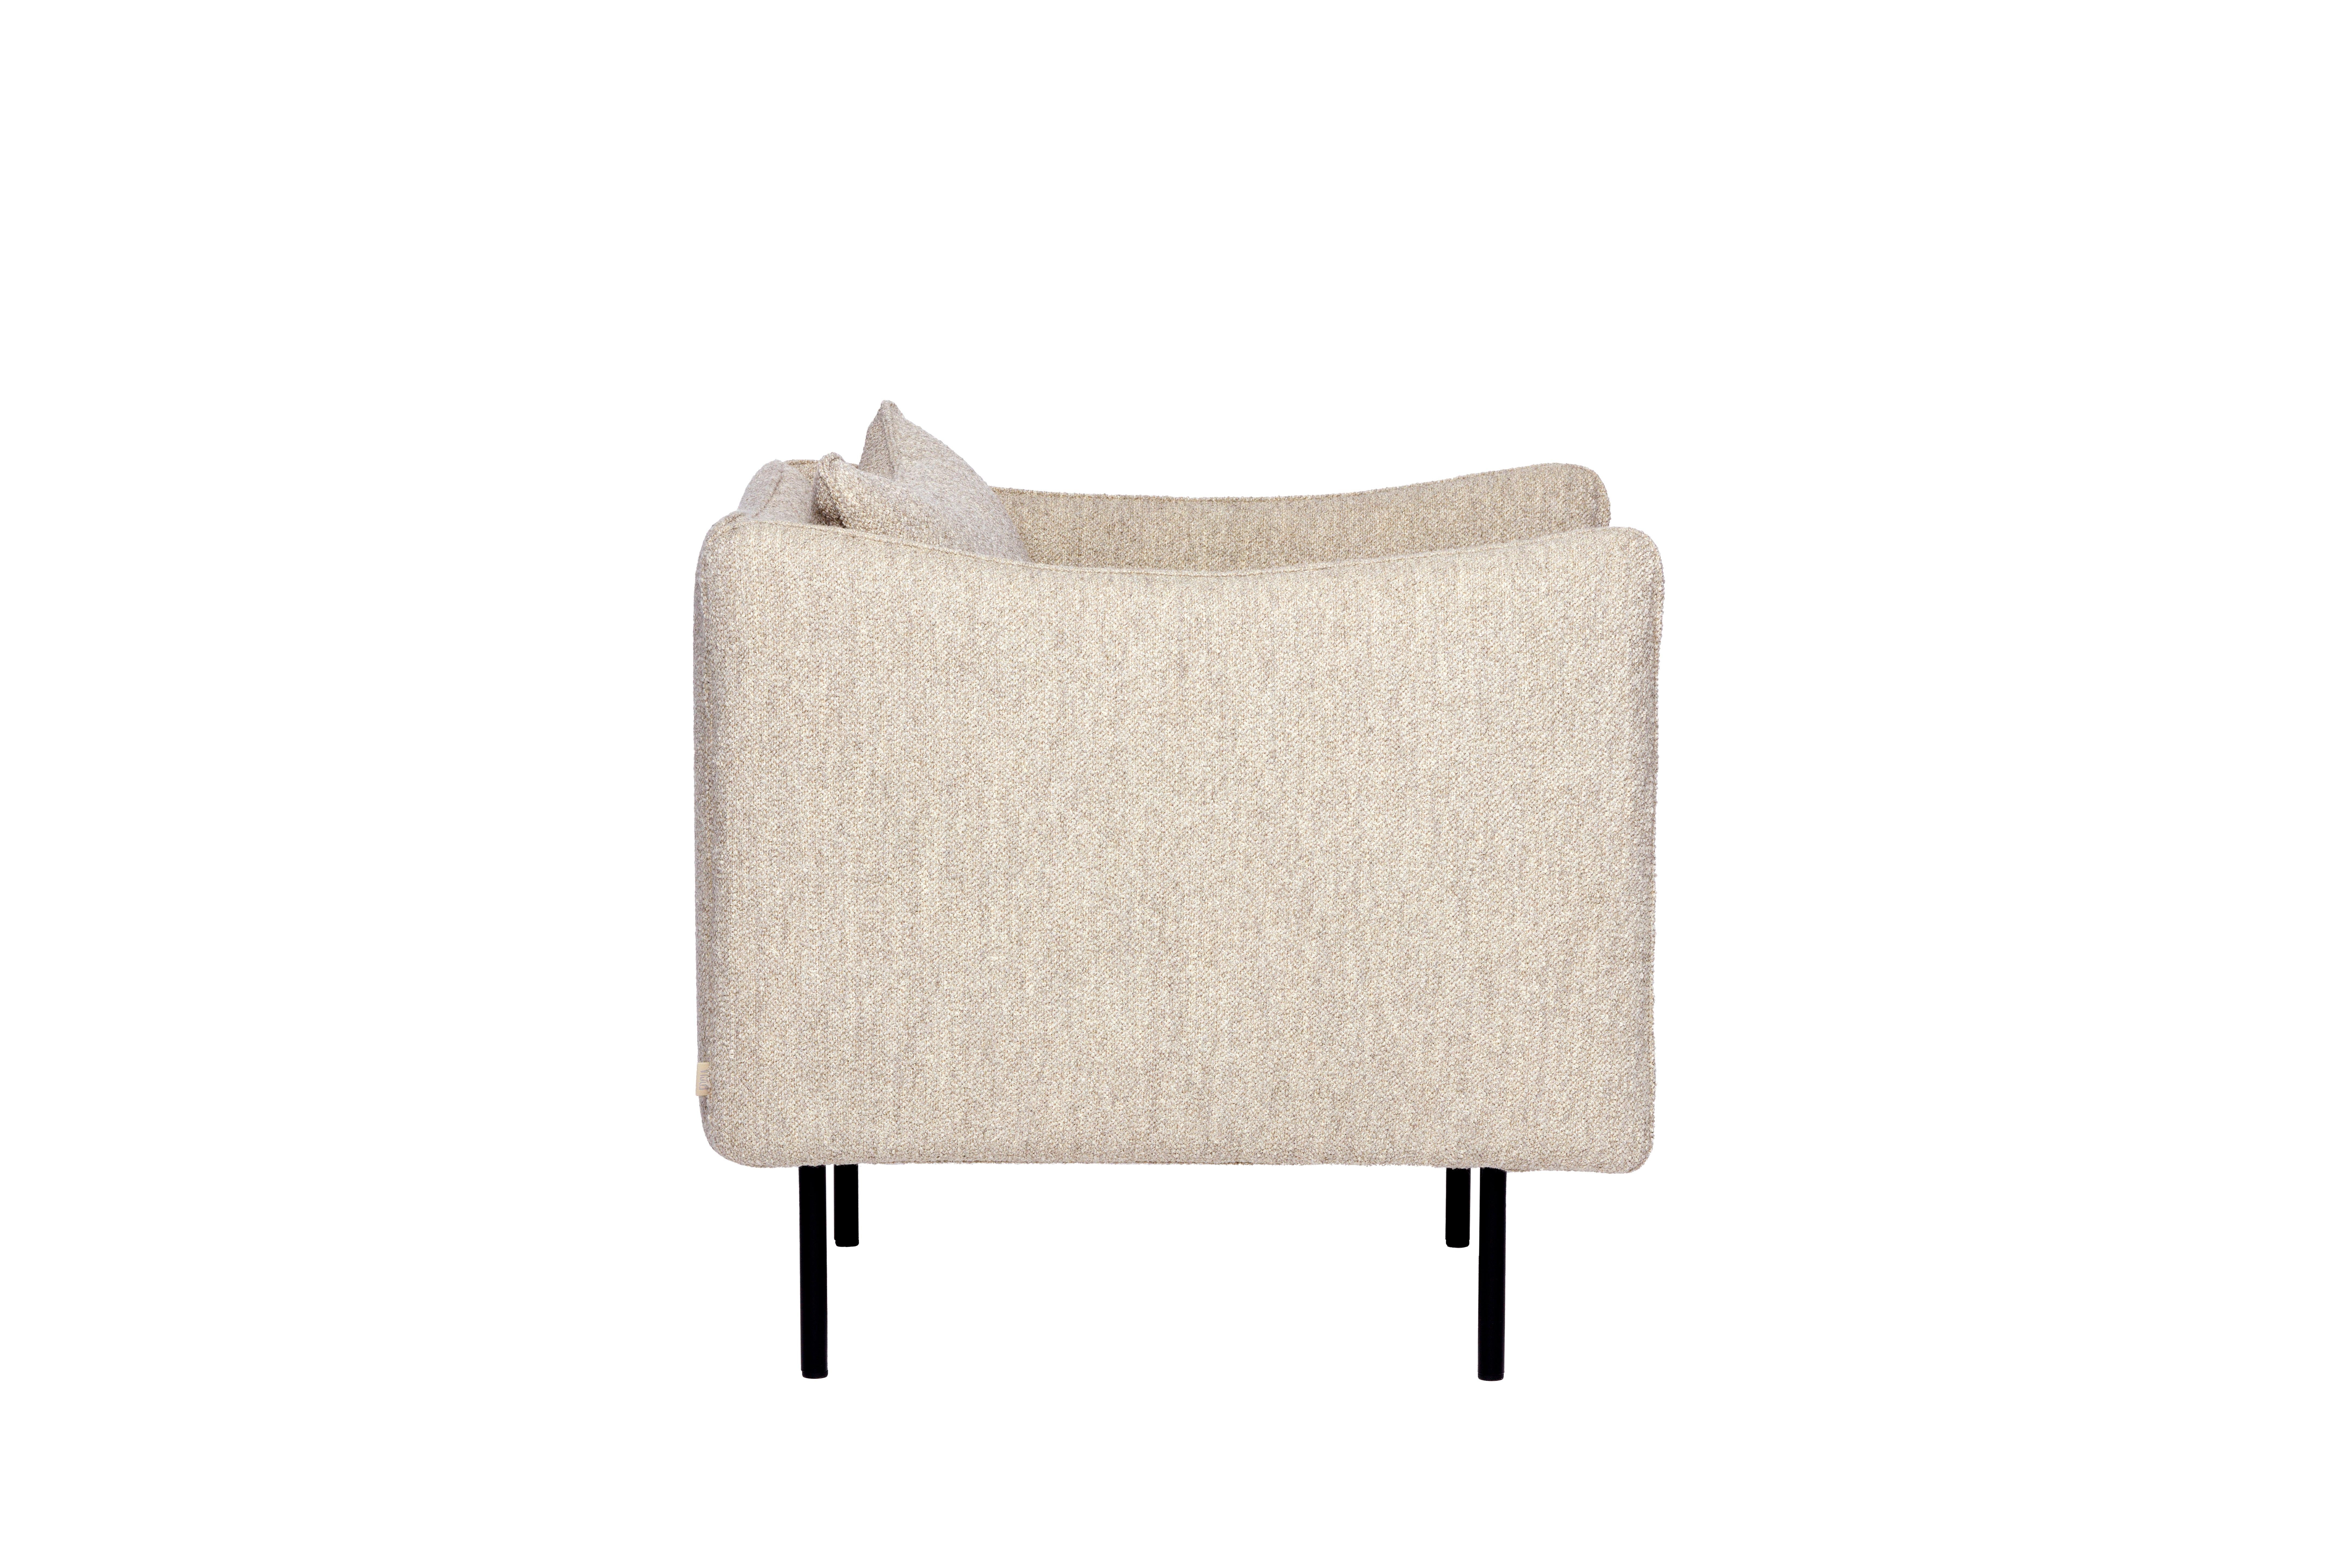 Metal Contemporary Armchair 'Tiki' by Fogia, Sand Fabric  For Sale